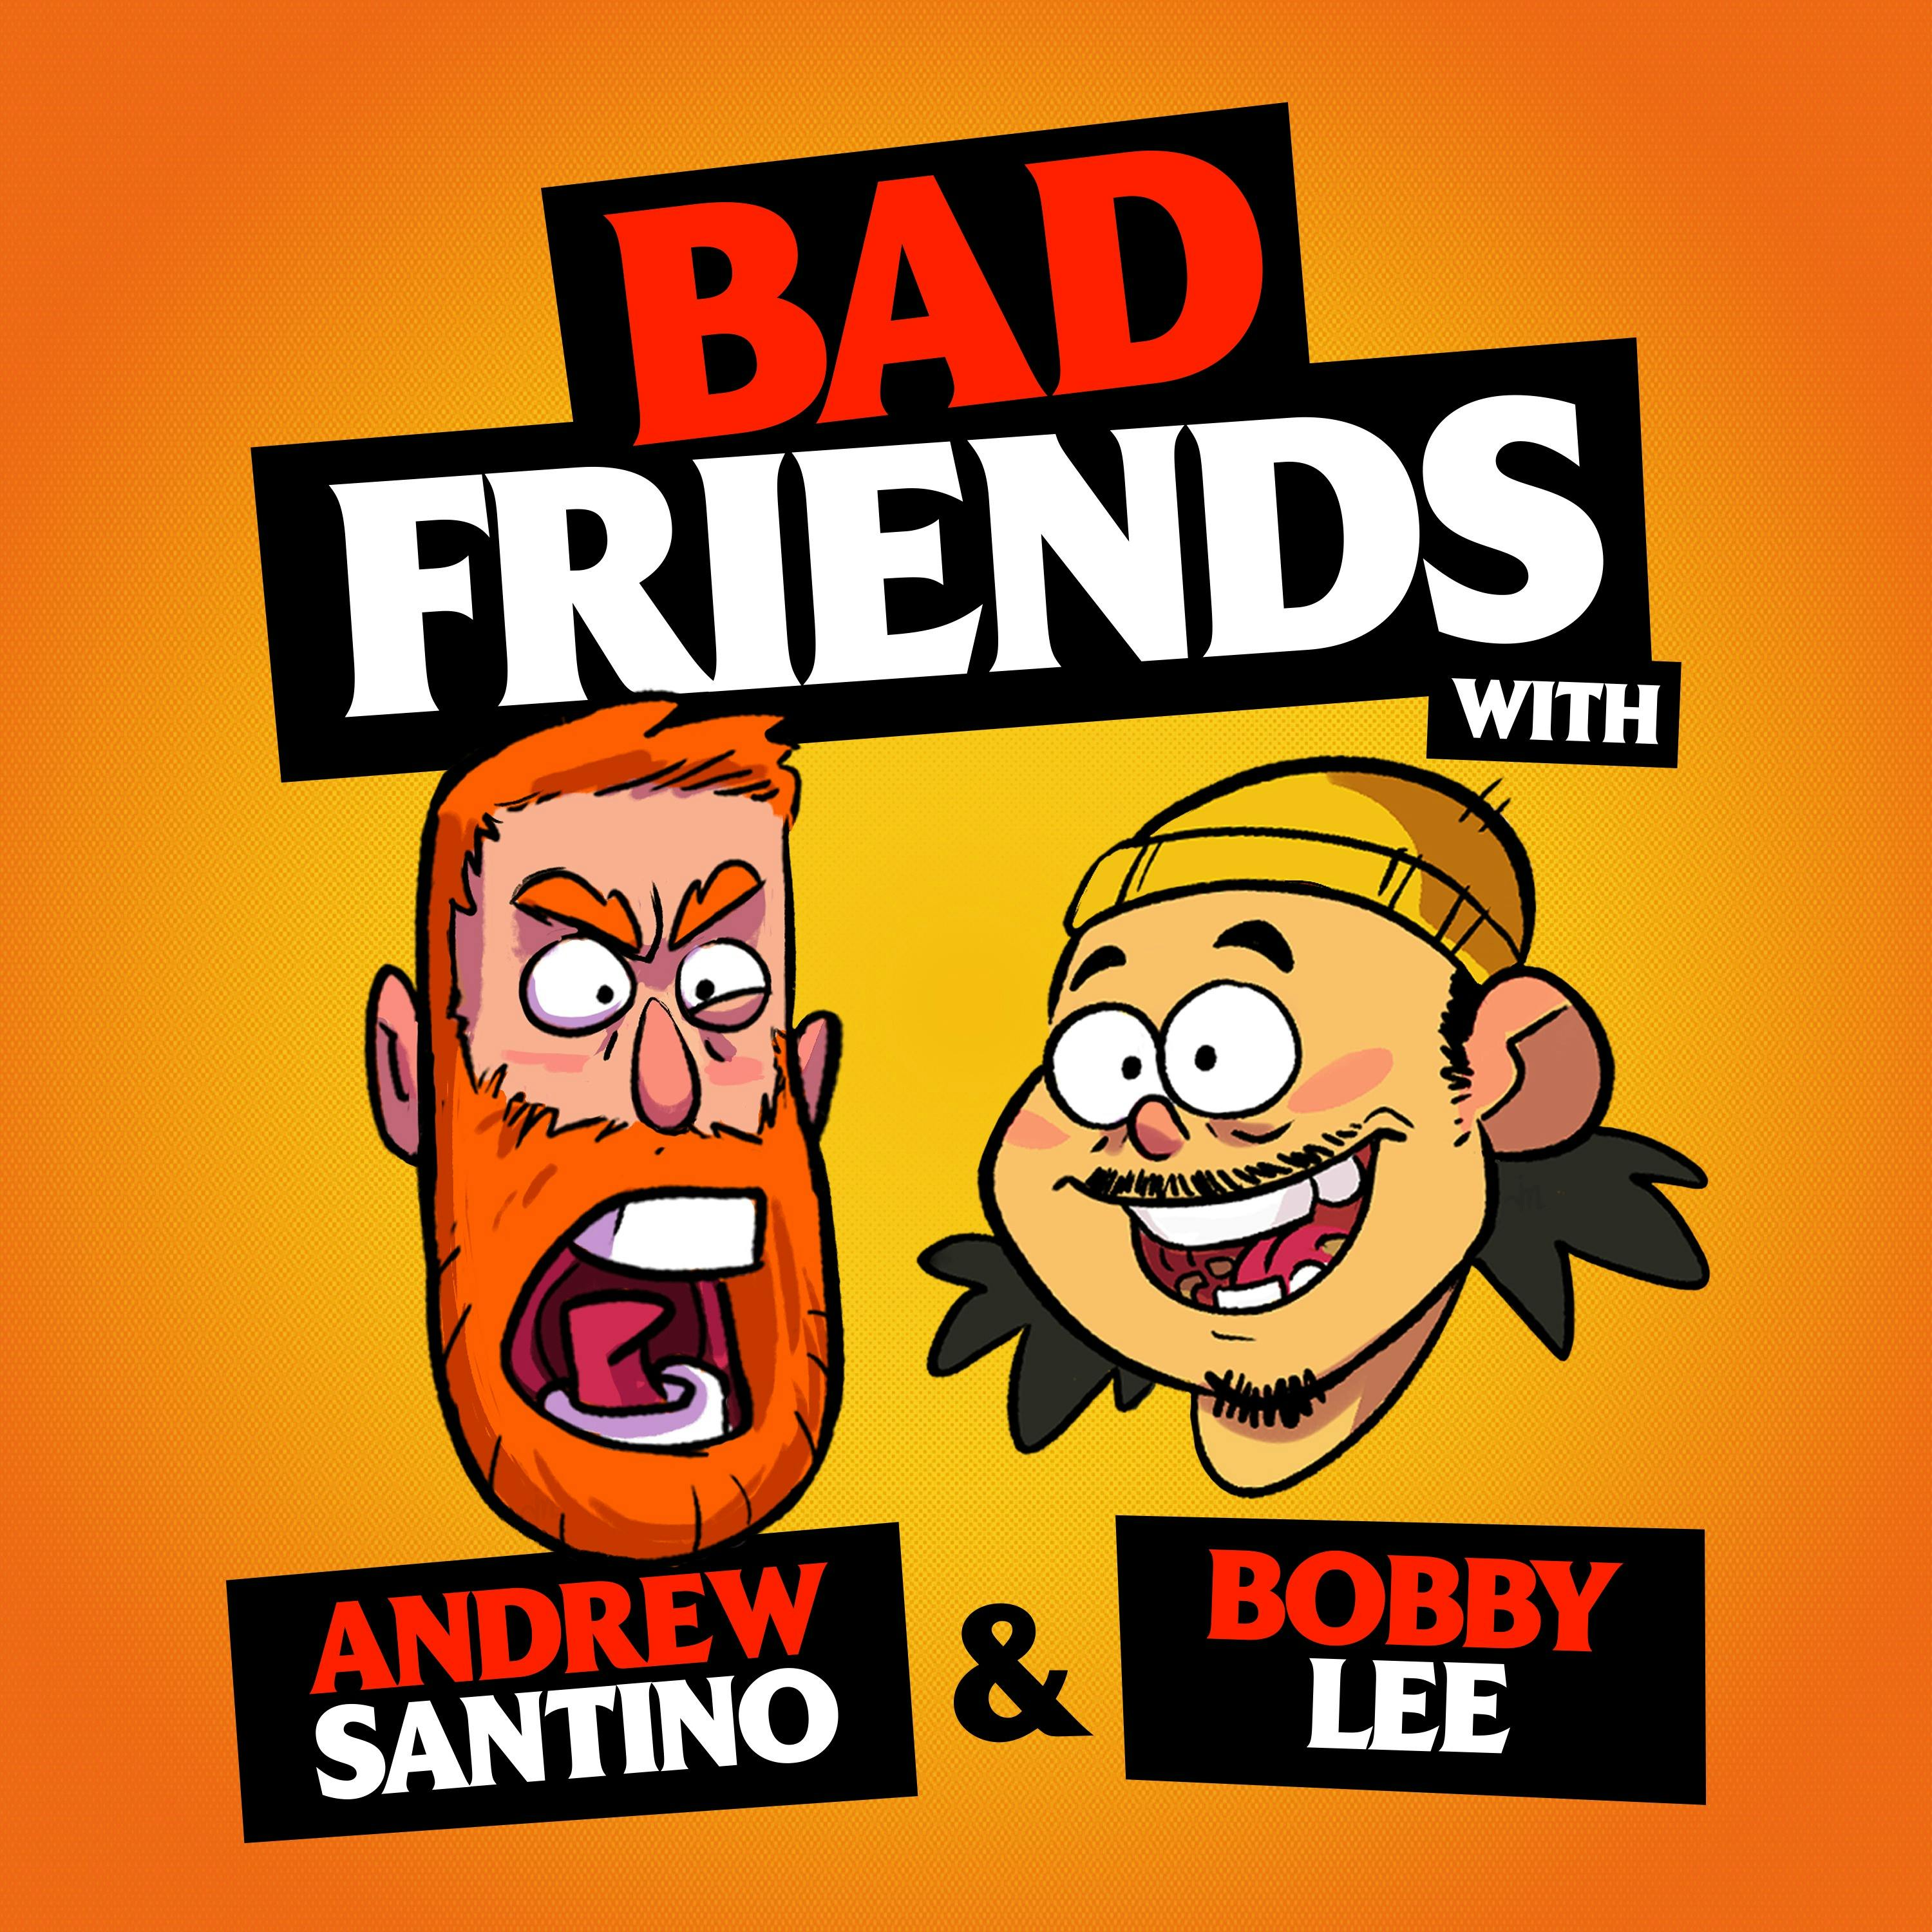 Rudy Rates Drake’s… Personality by Andrew Santino and Bobby Lee